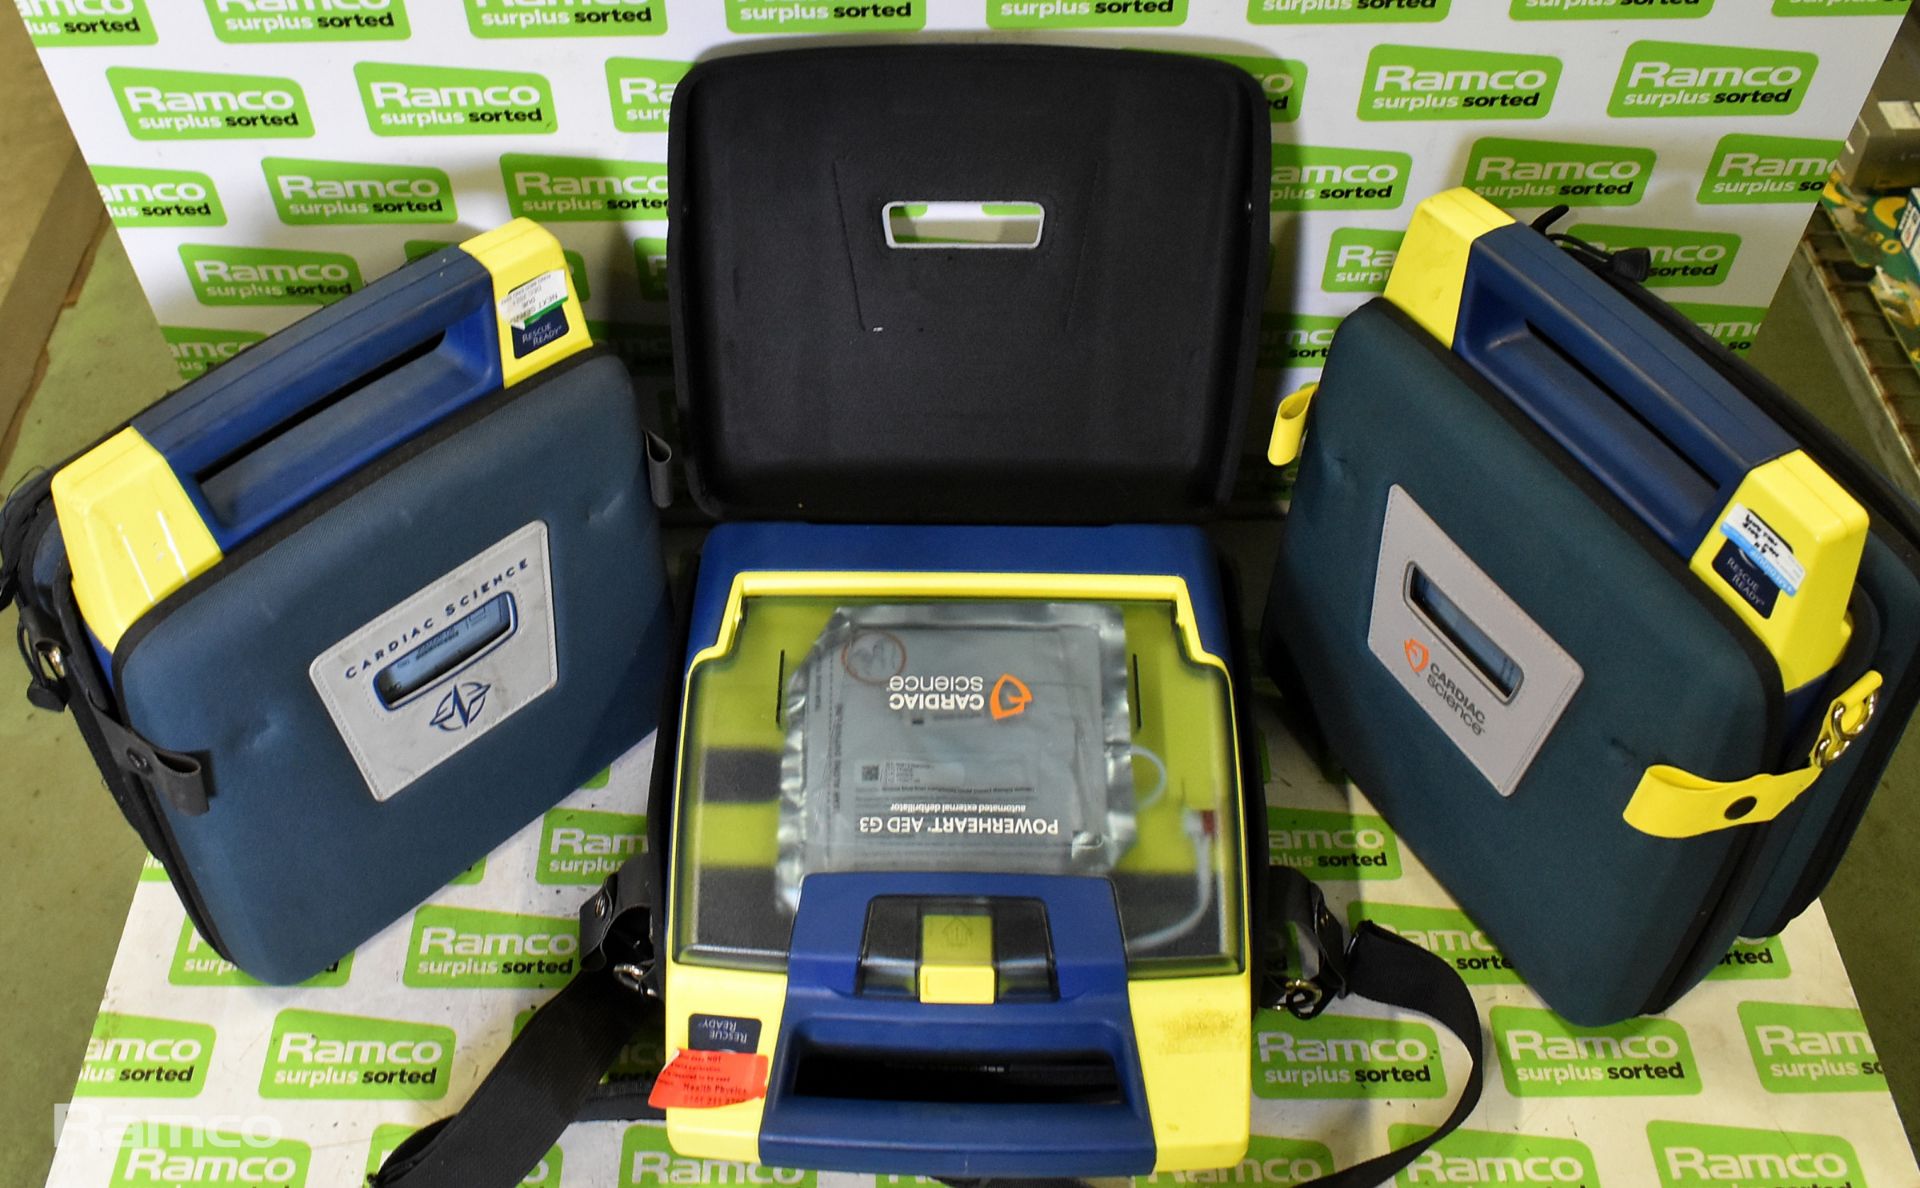 3x Cardiac Science G3 AED defibrillator - in carry case (REQUIRES CALIBRATION) - Image 2 of 15